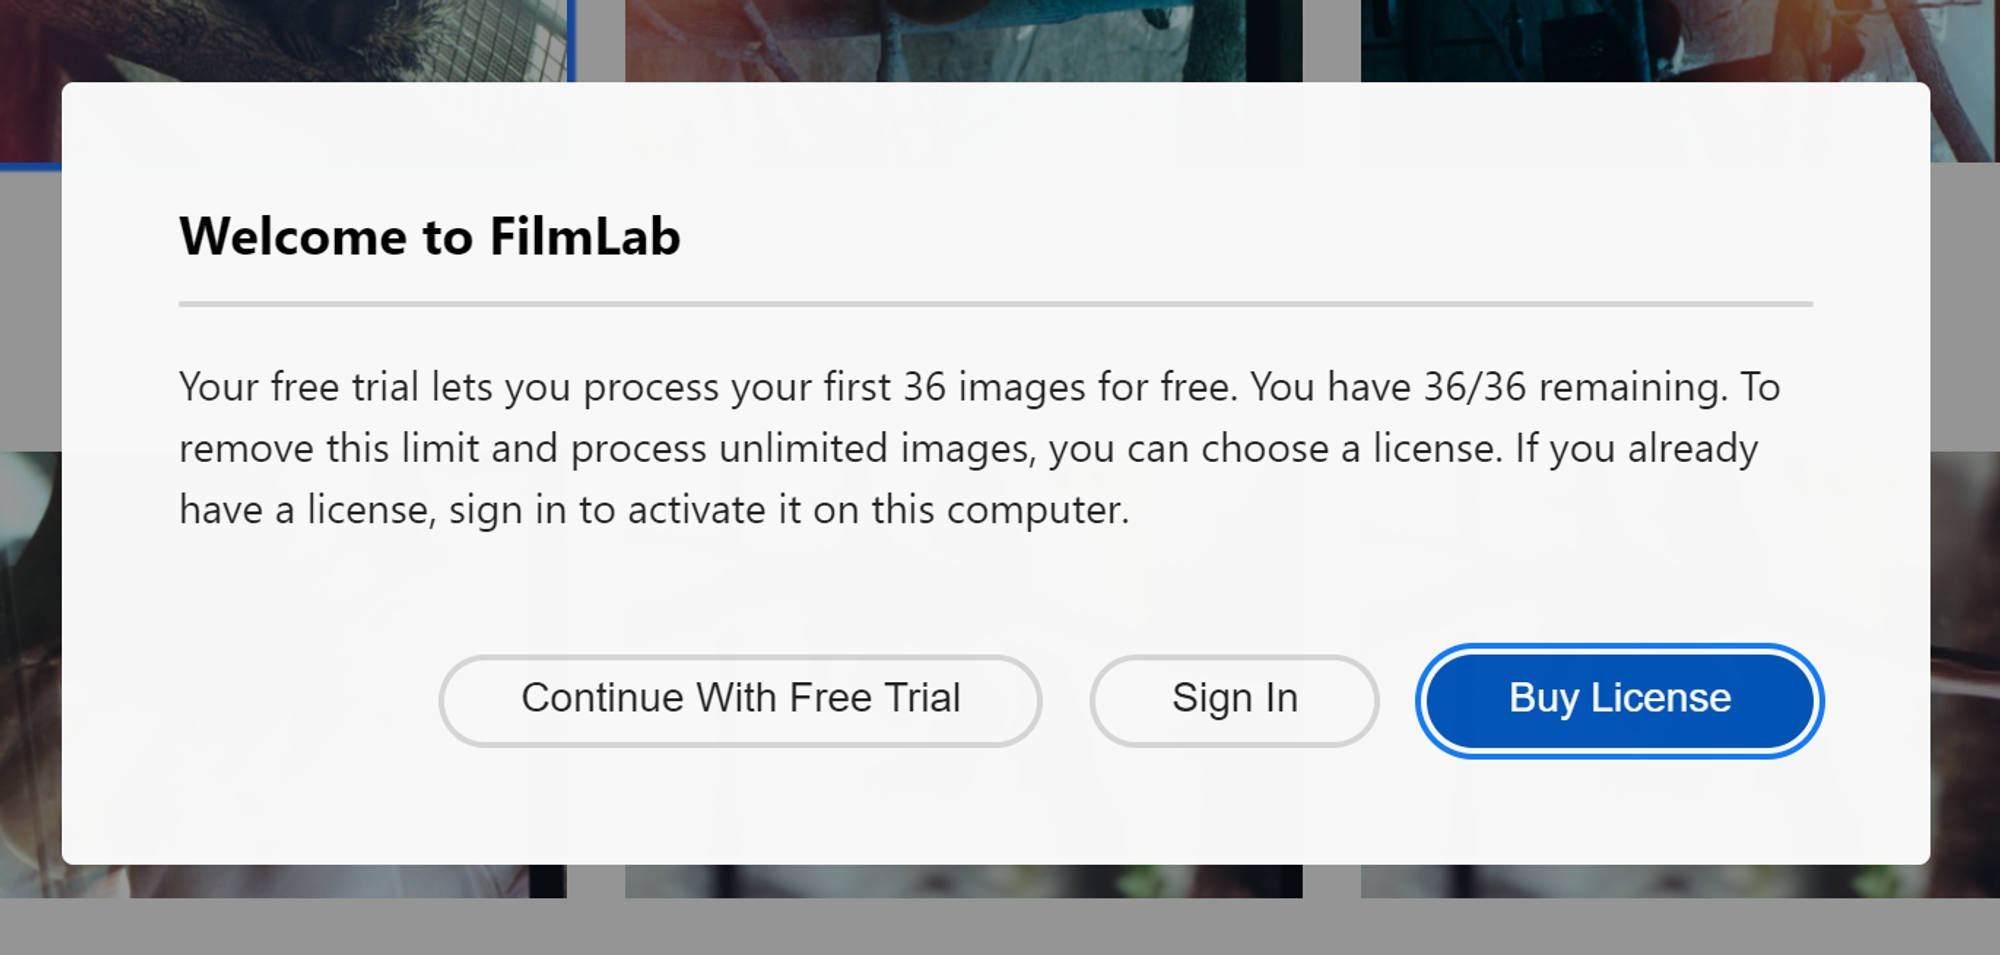 The welcome screen explains FilmLab’s new free trial mode